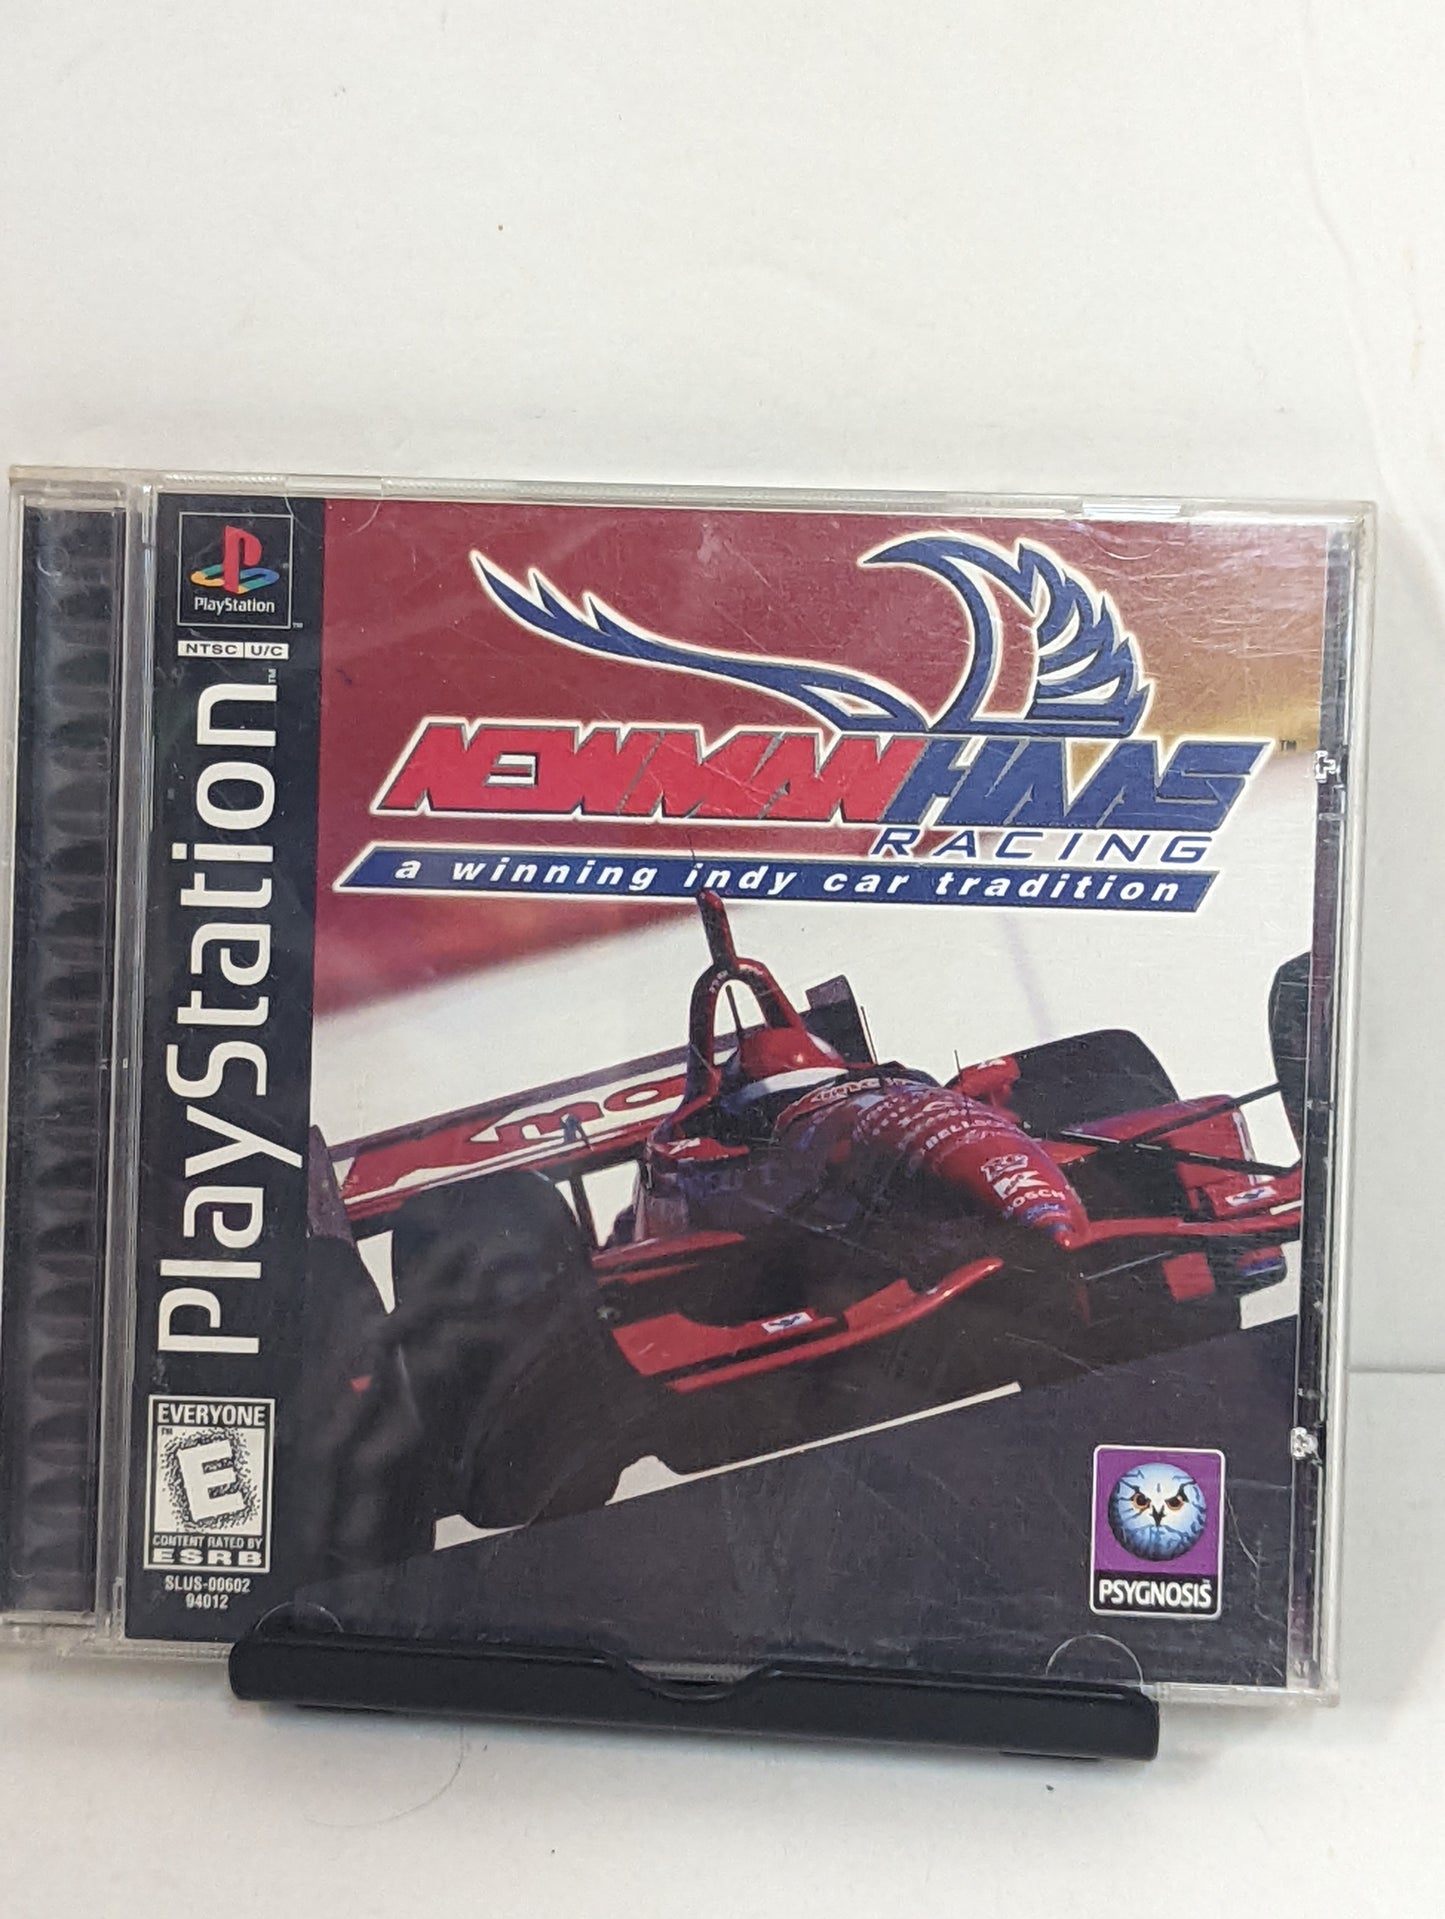 PS1 Newman Haas Racing game